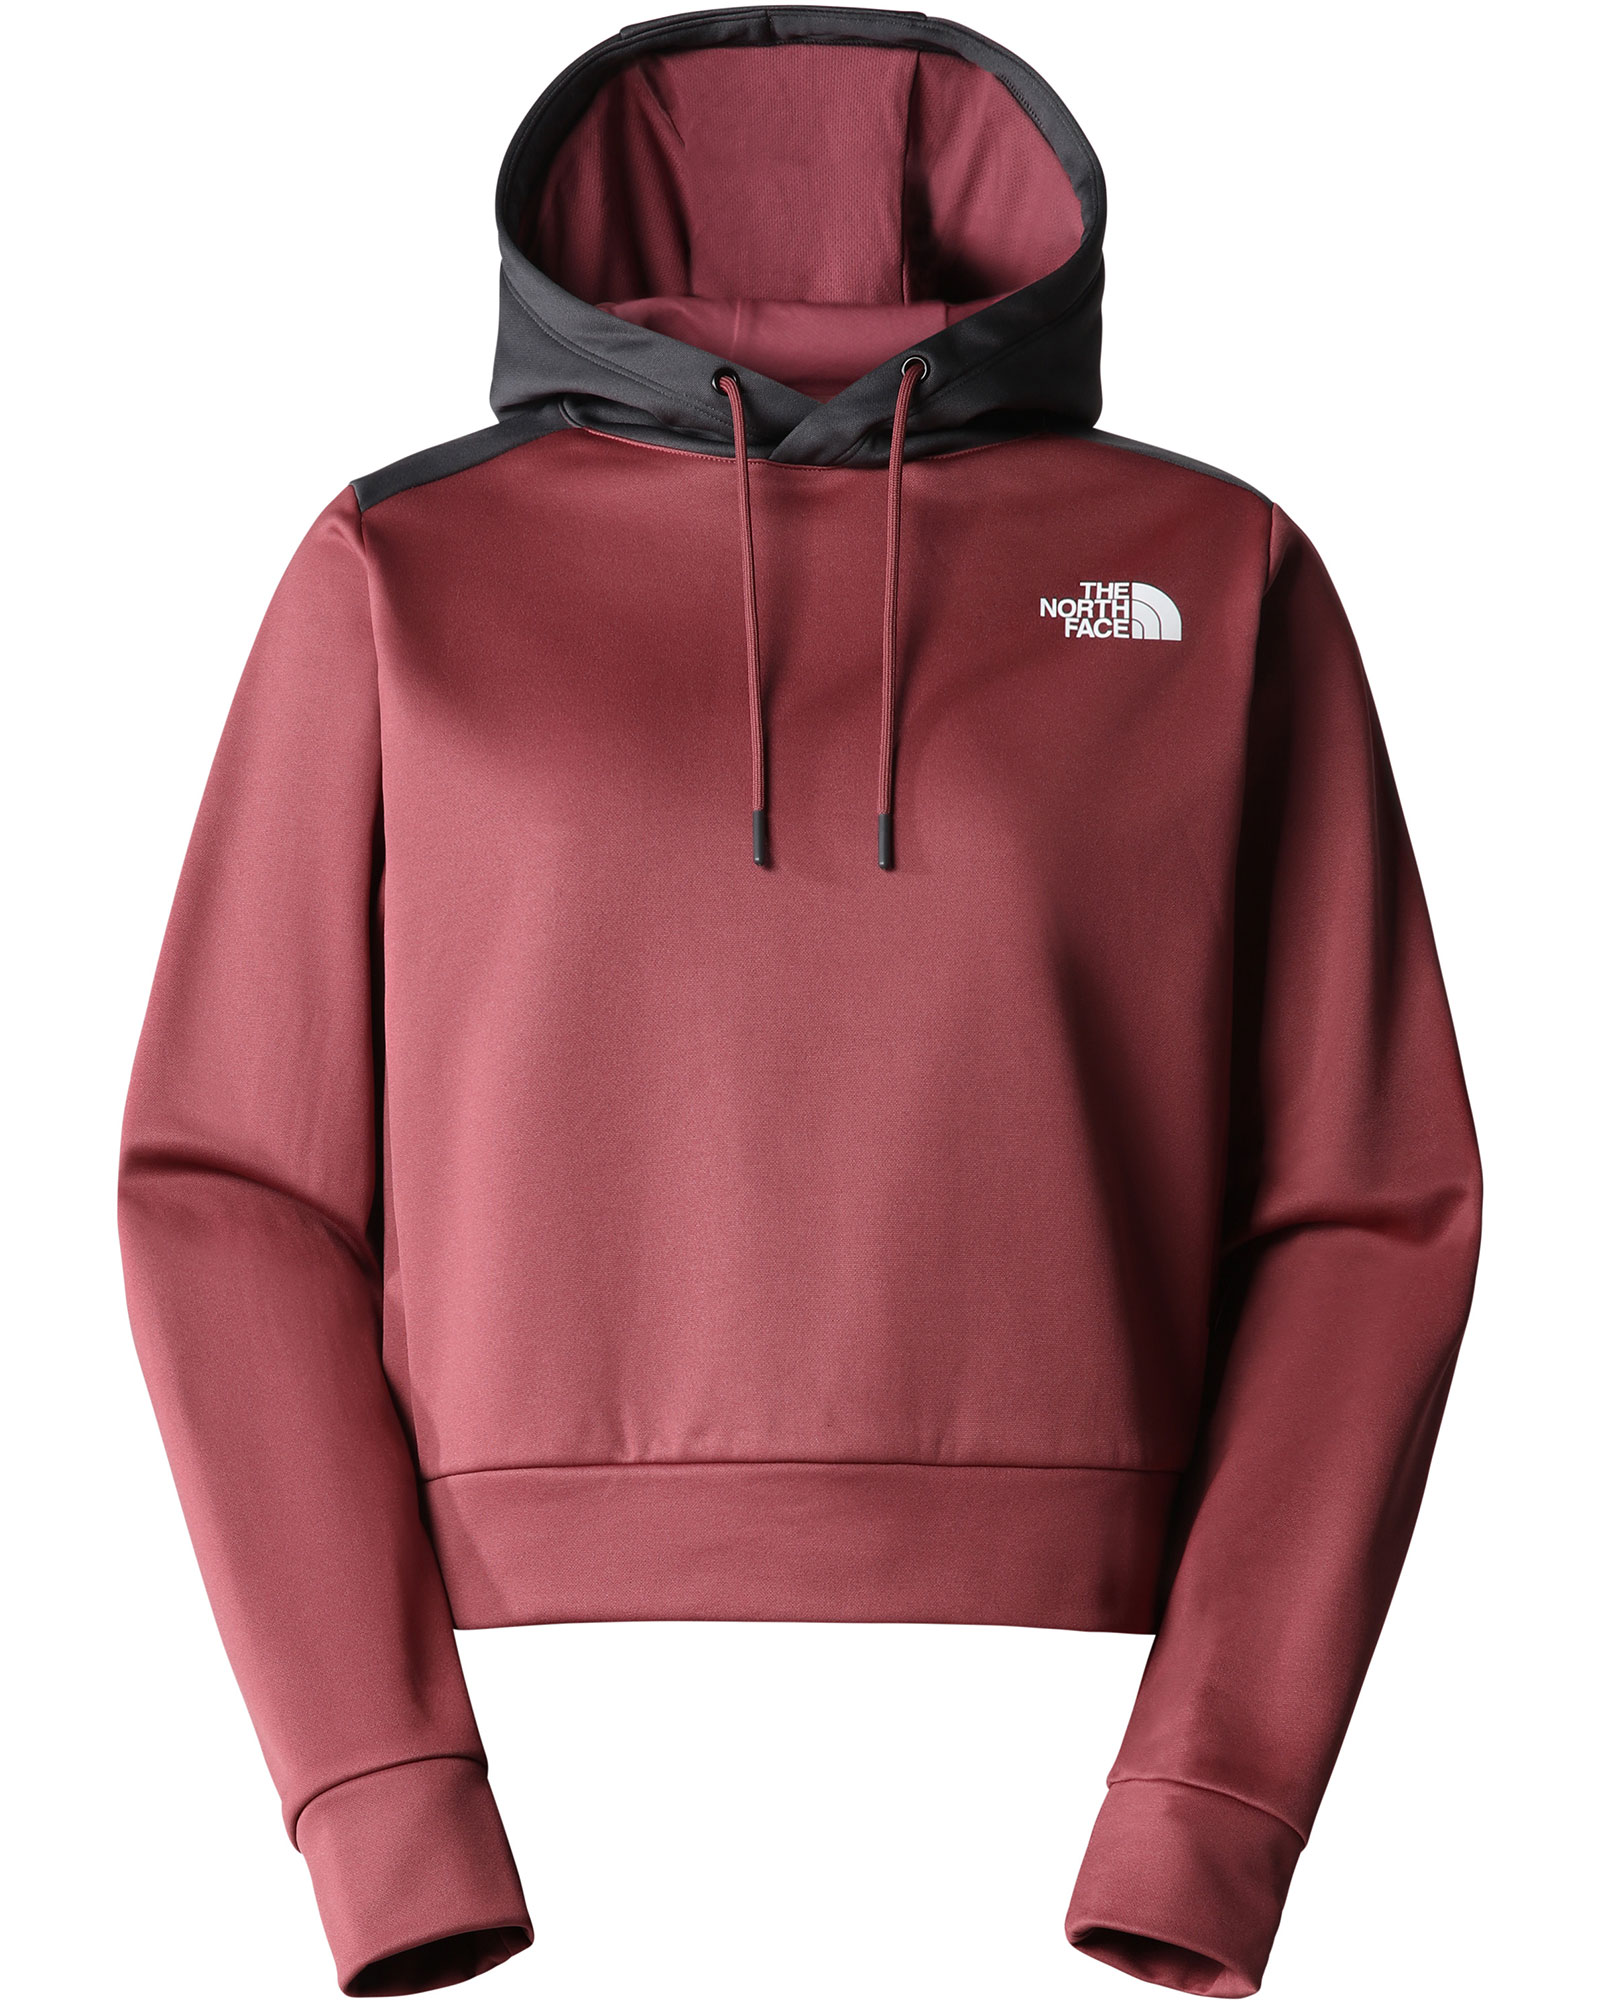 Product image of The North Face Reaxion Women's Fleece Pullover Hoodie